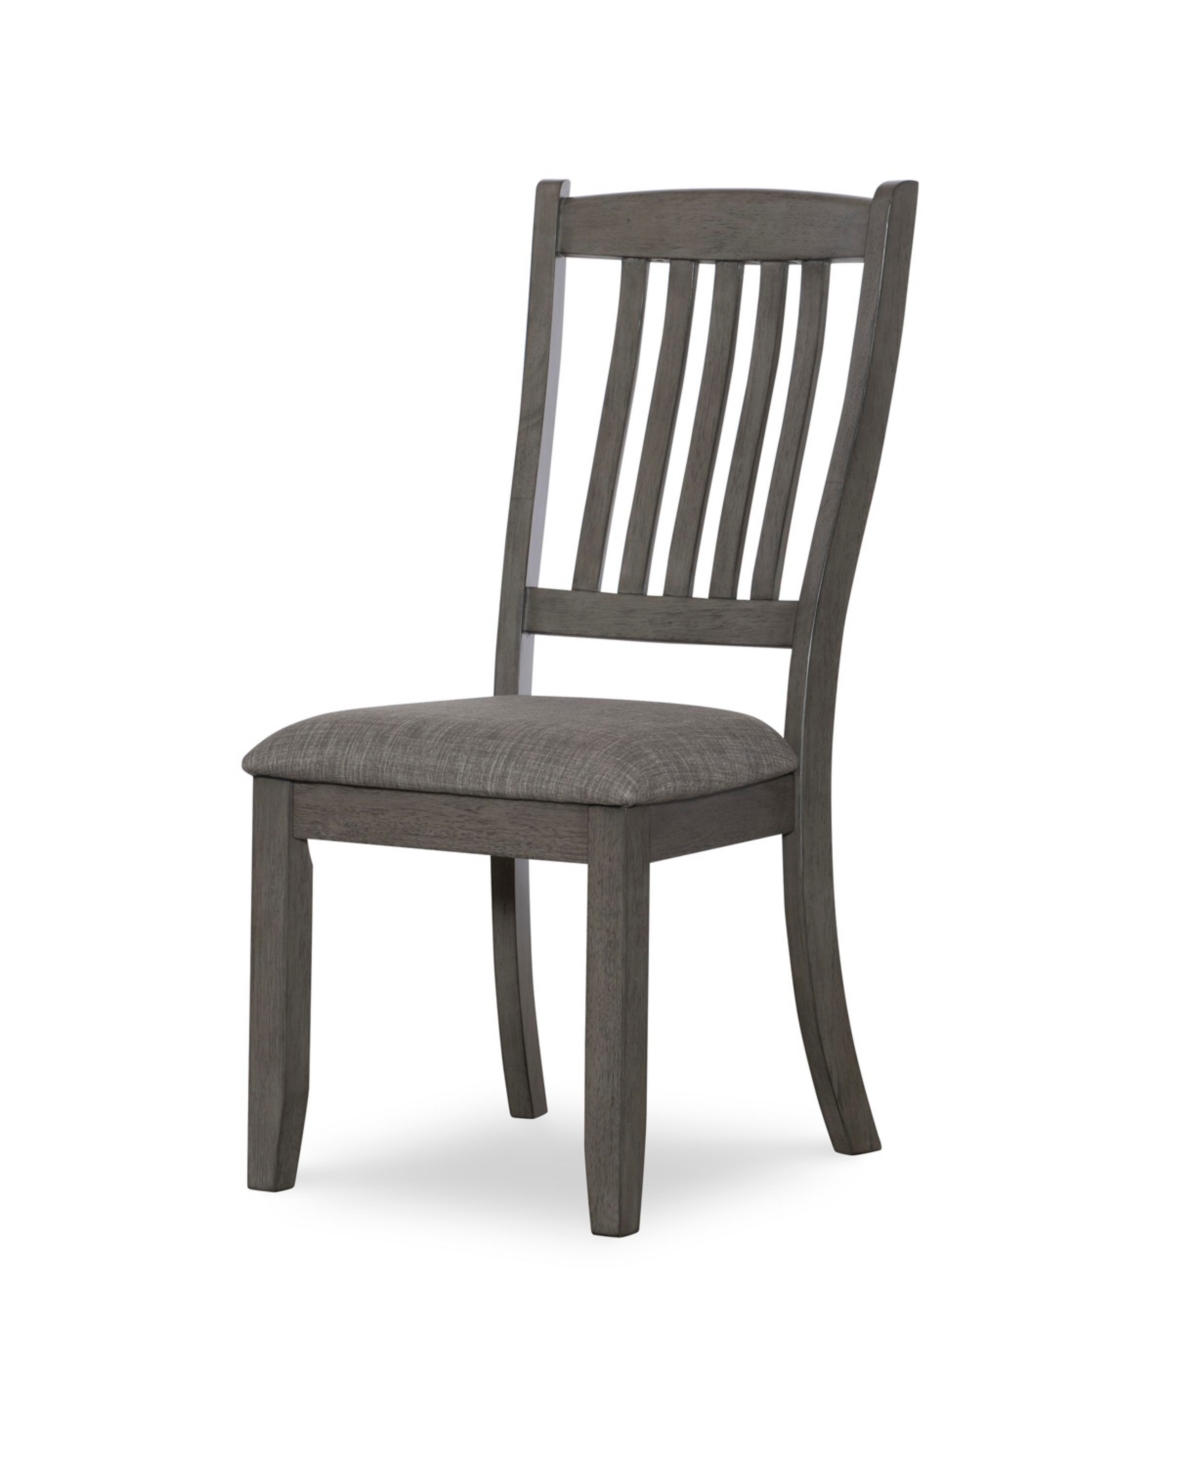 Home Furniture Outfitters Allston Park Gray Farmhouse Dining Chair